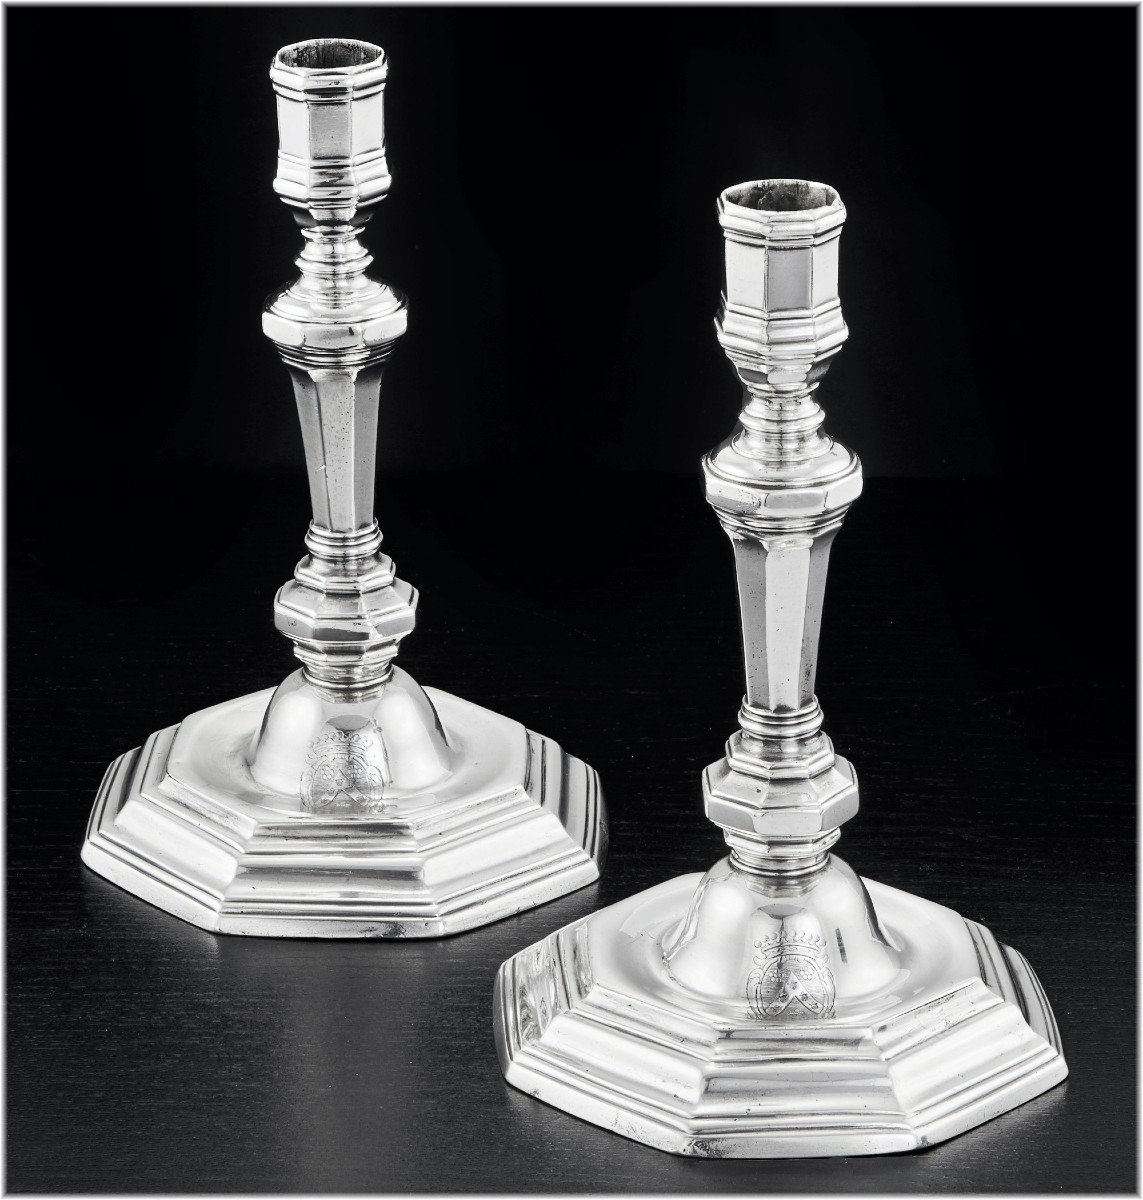 Jean-pierre II Buchet : 18th Century Sterling Silver Candlesticks Brittany Rennes 1733-34 - Coat Of Arms